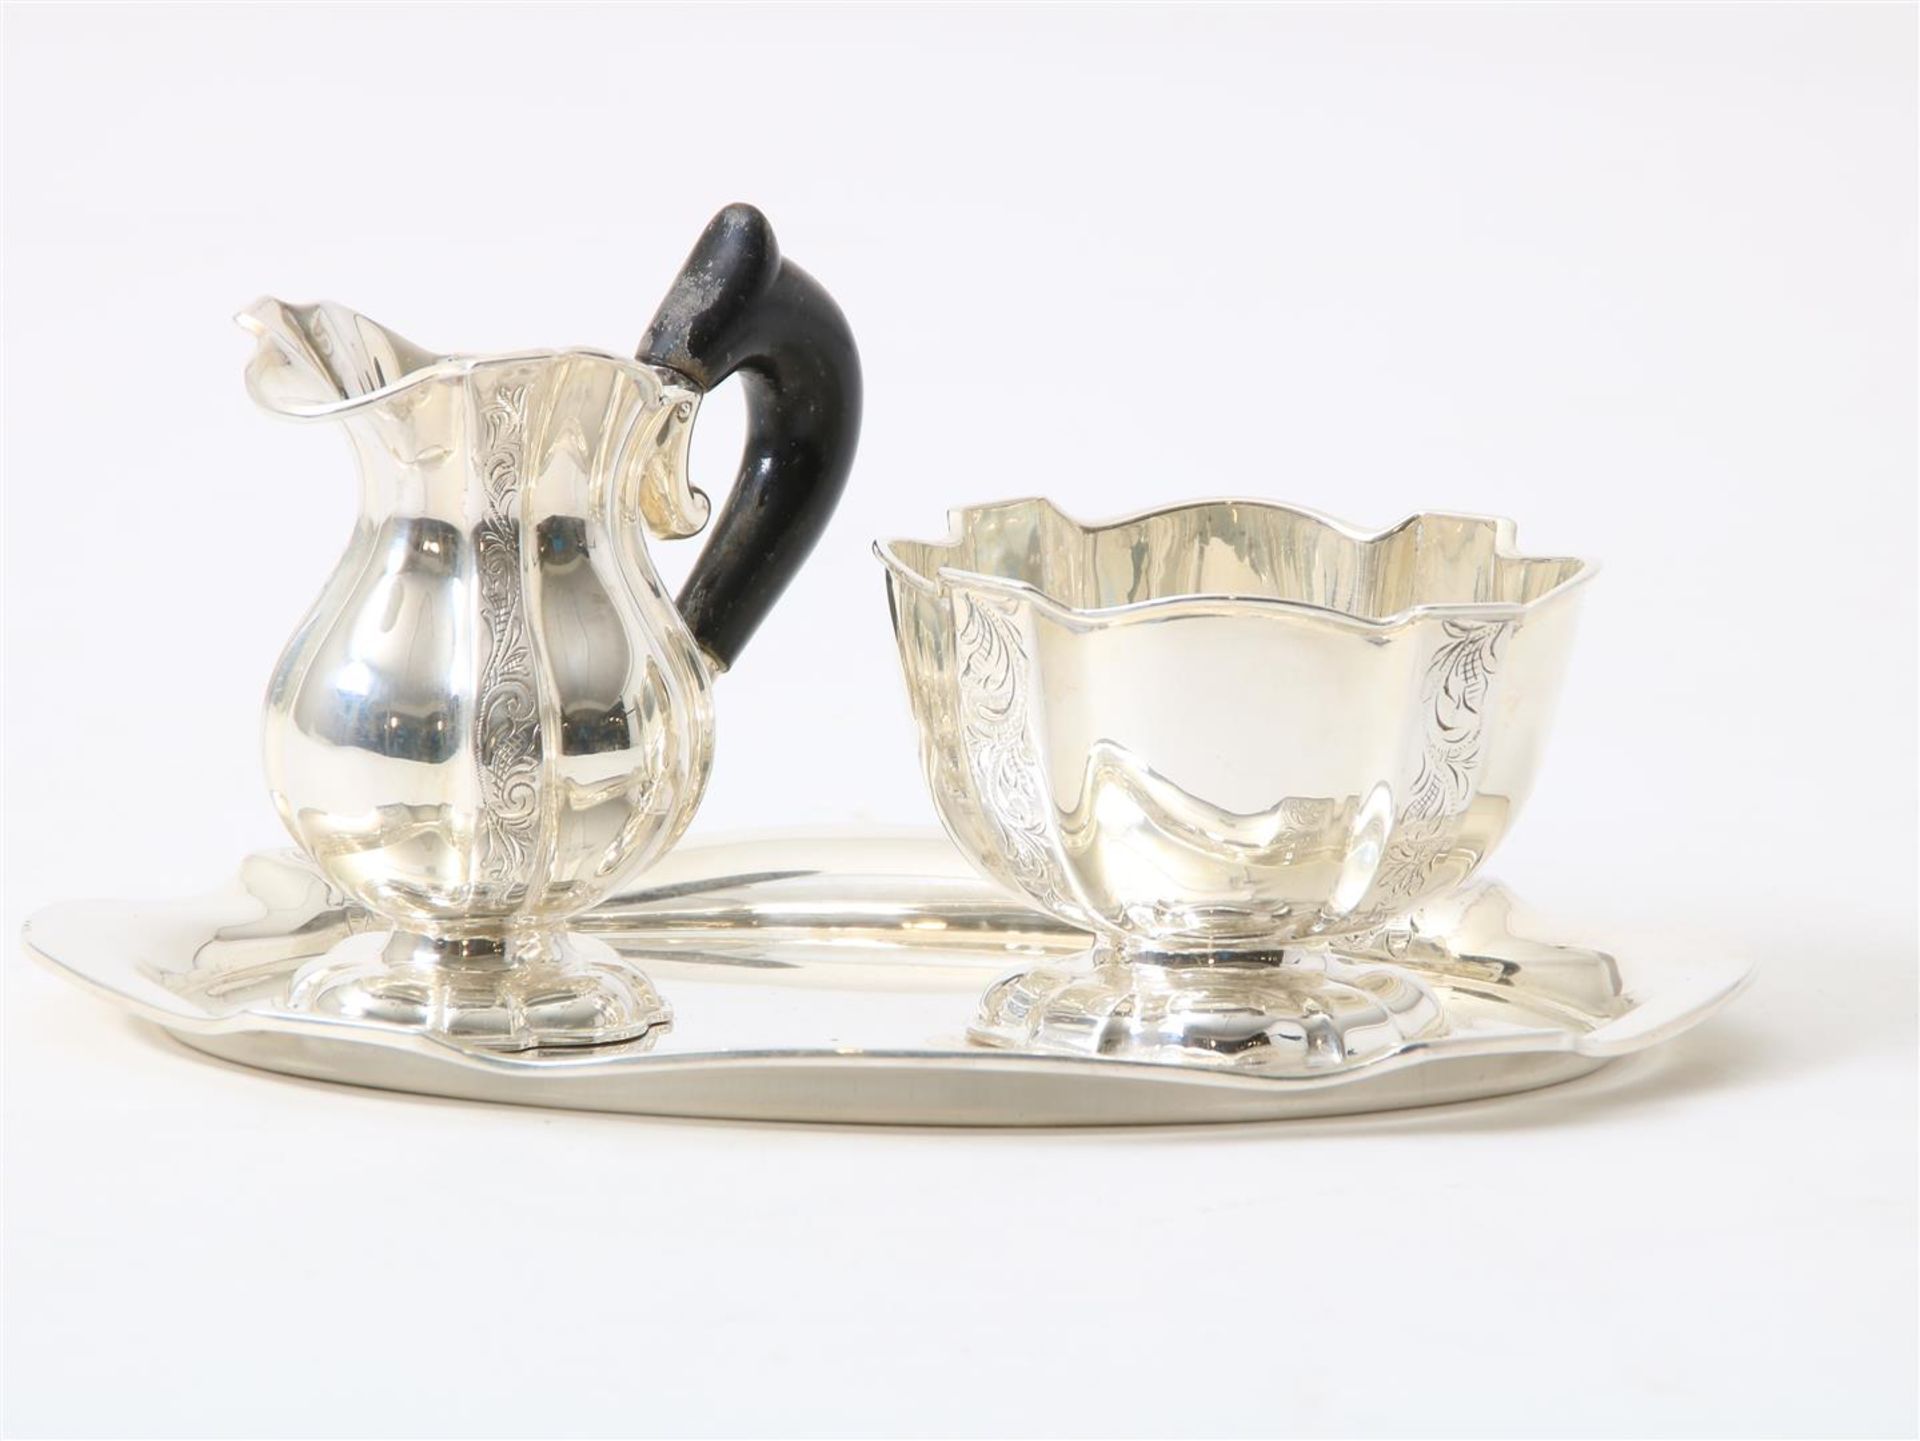 Silver cream set, consisting of milk jug and sugar bowl on tray, grade 835/000, gross weight 260